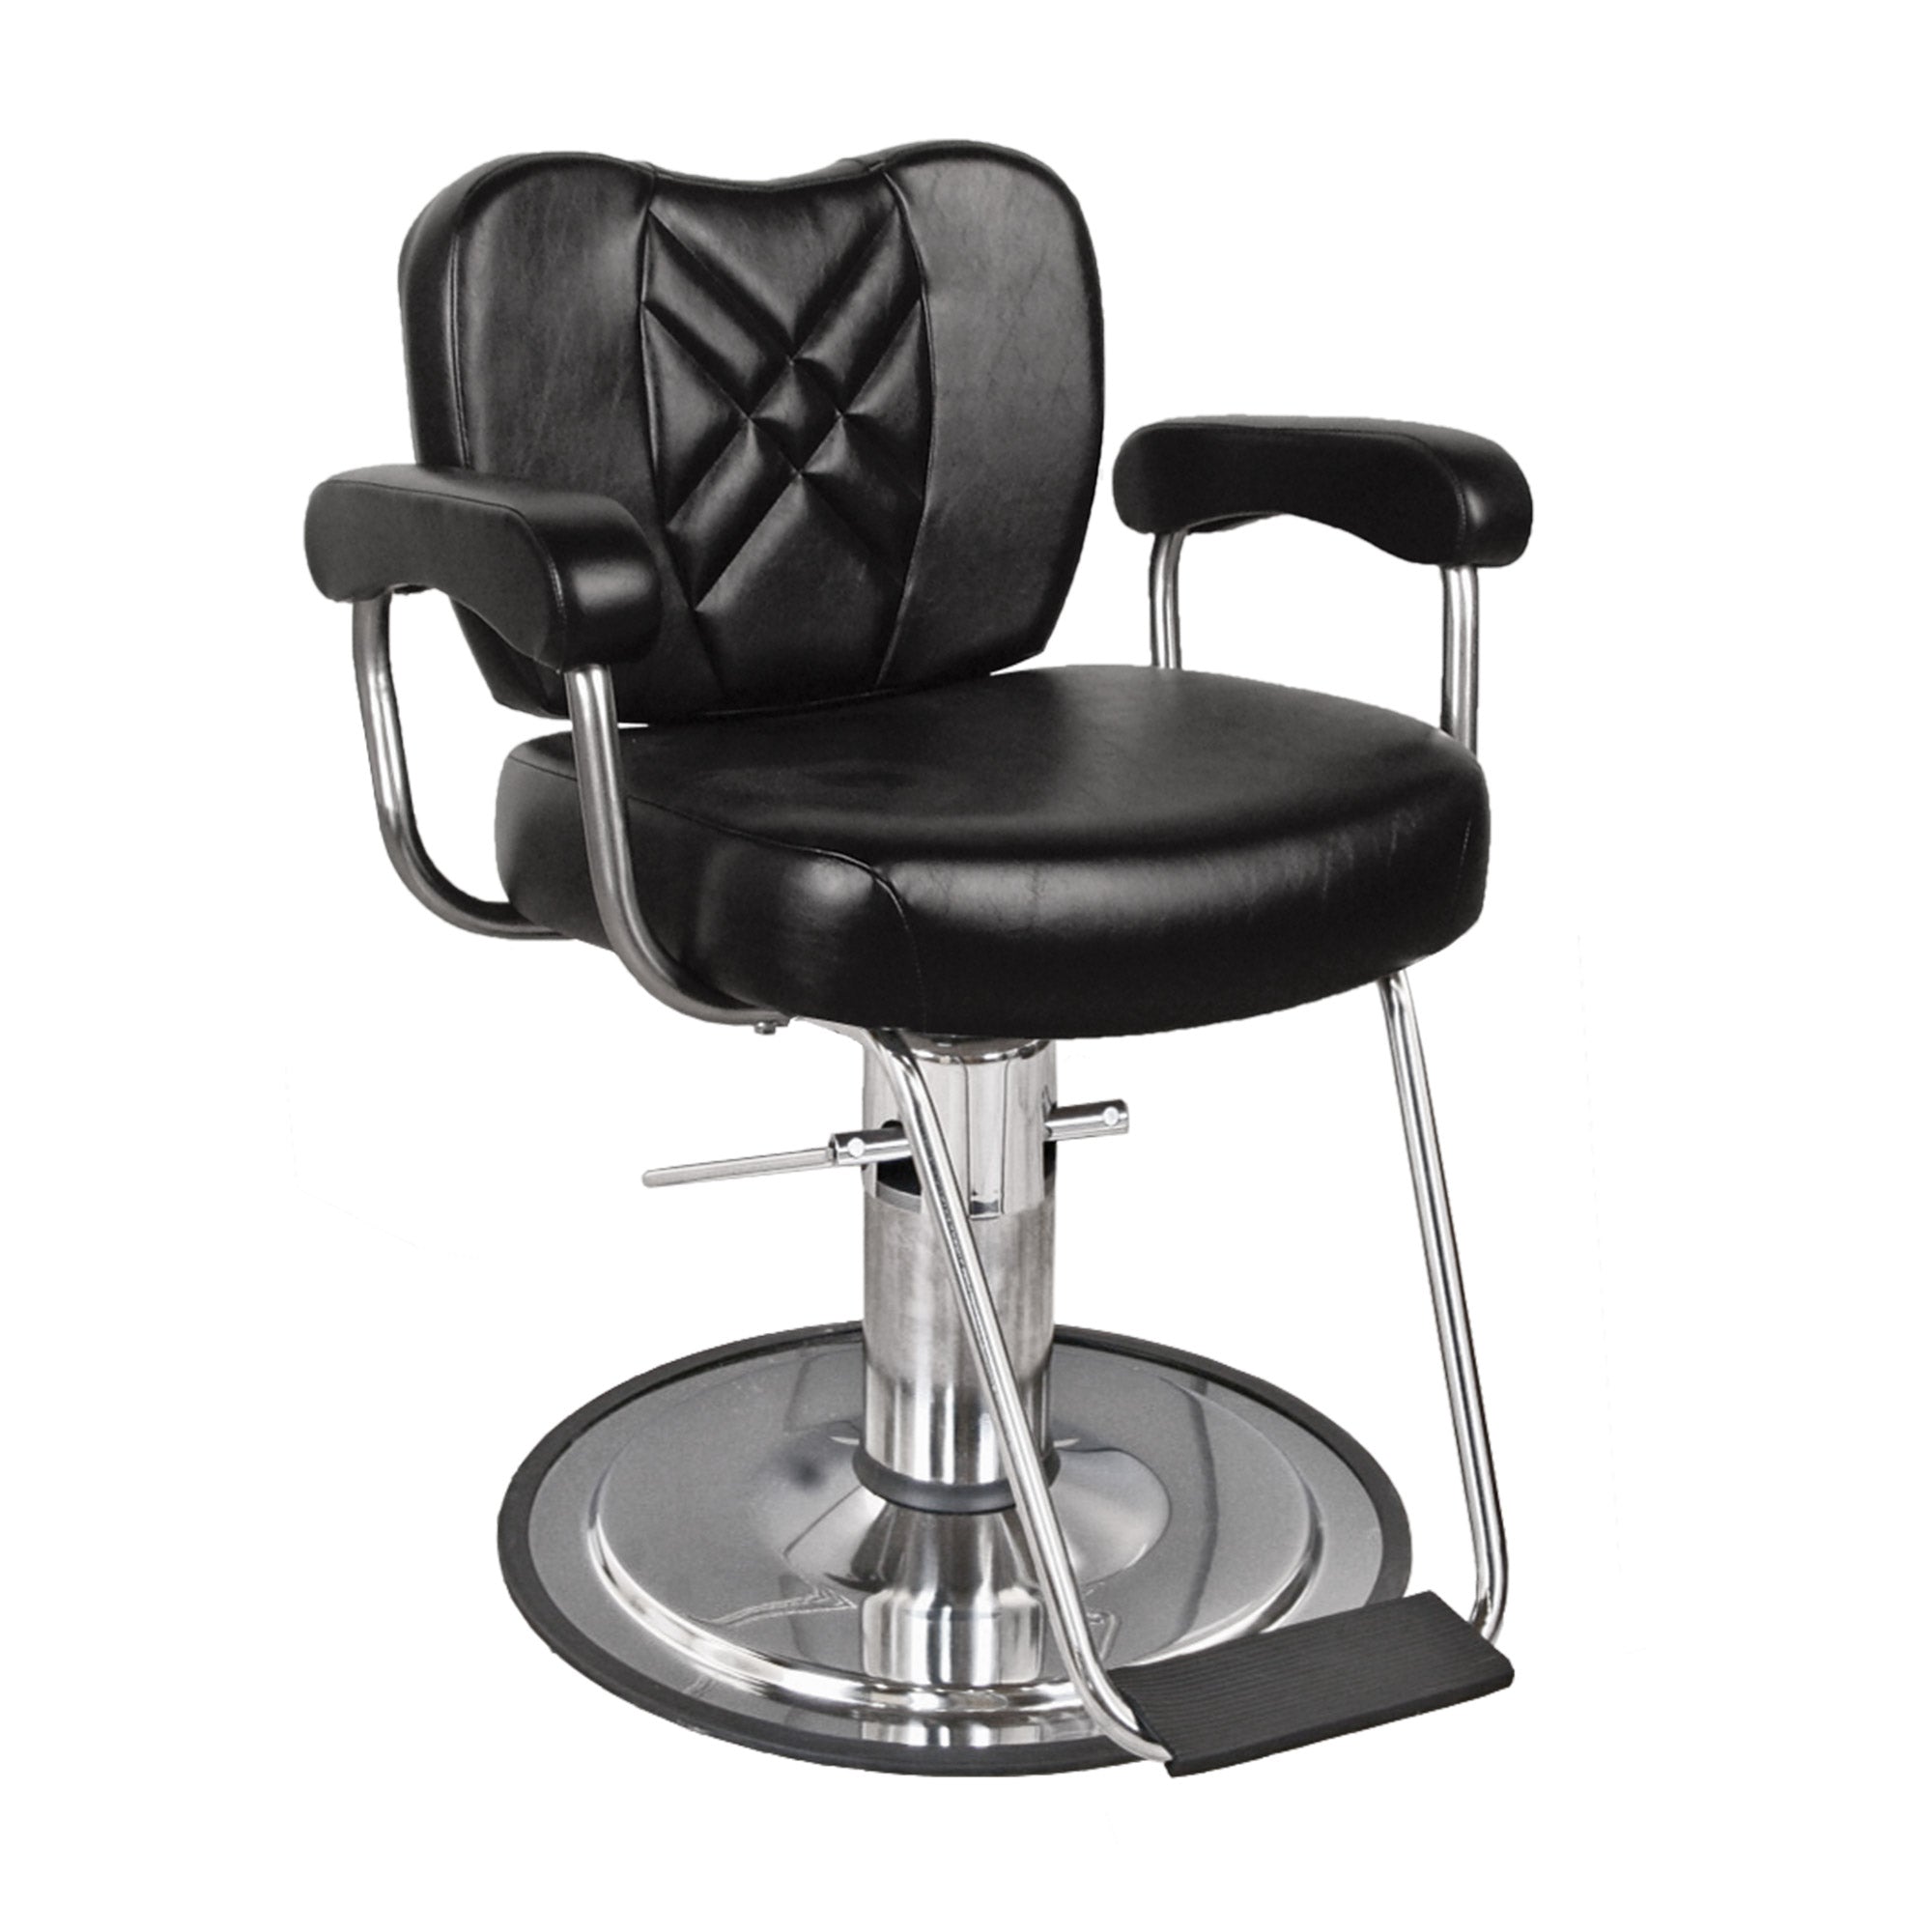 Metro Barber Chair - Collins